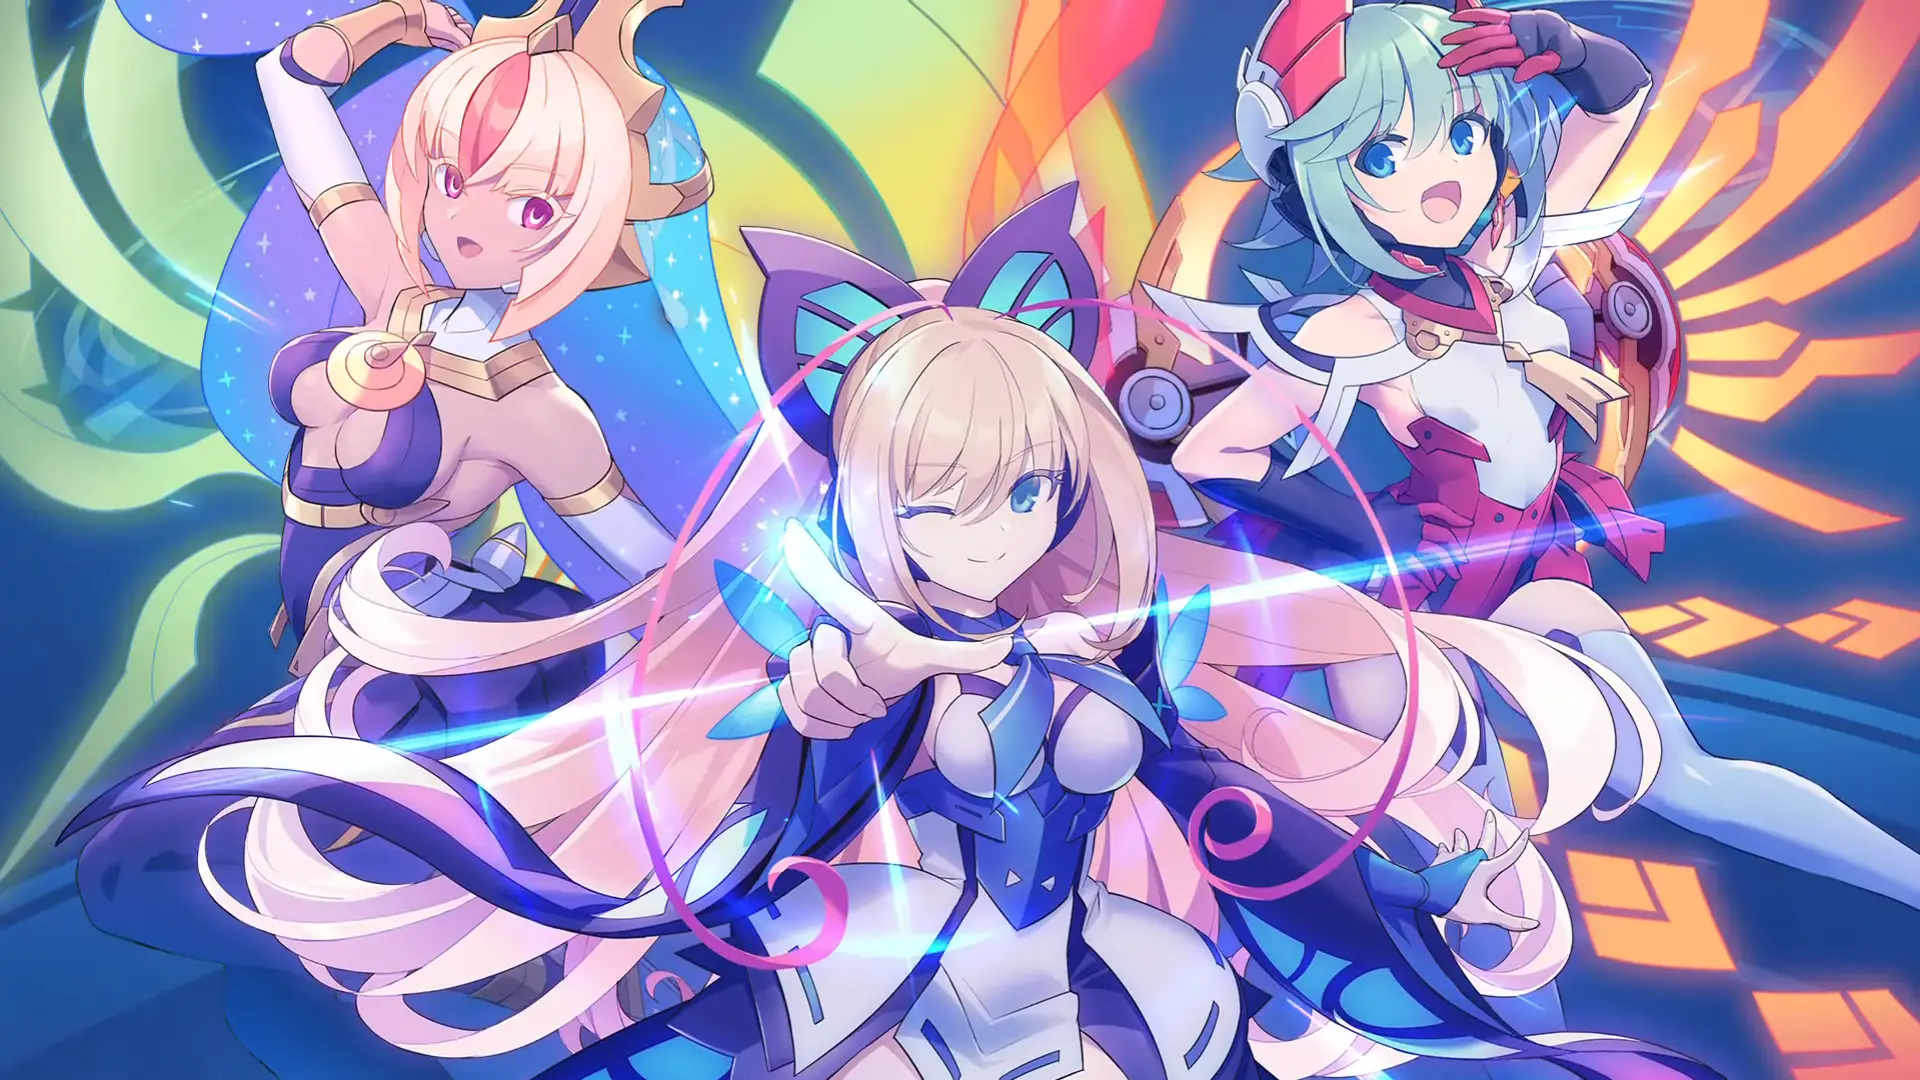 GUNVOLT RECORDS Cychronicle Shares New Gameplay Video Featuring “Last Wish”